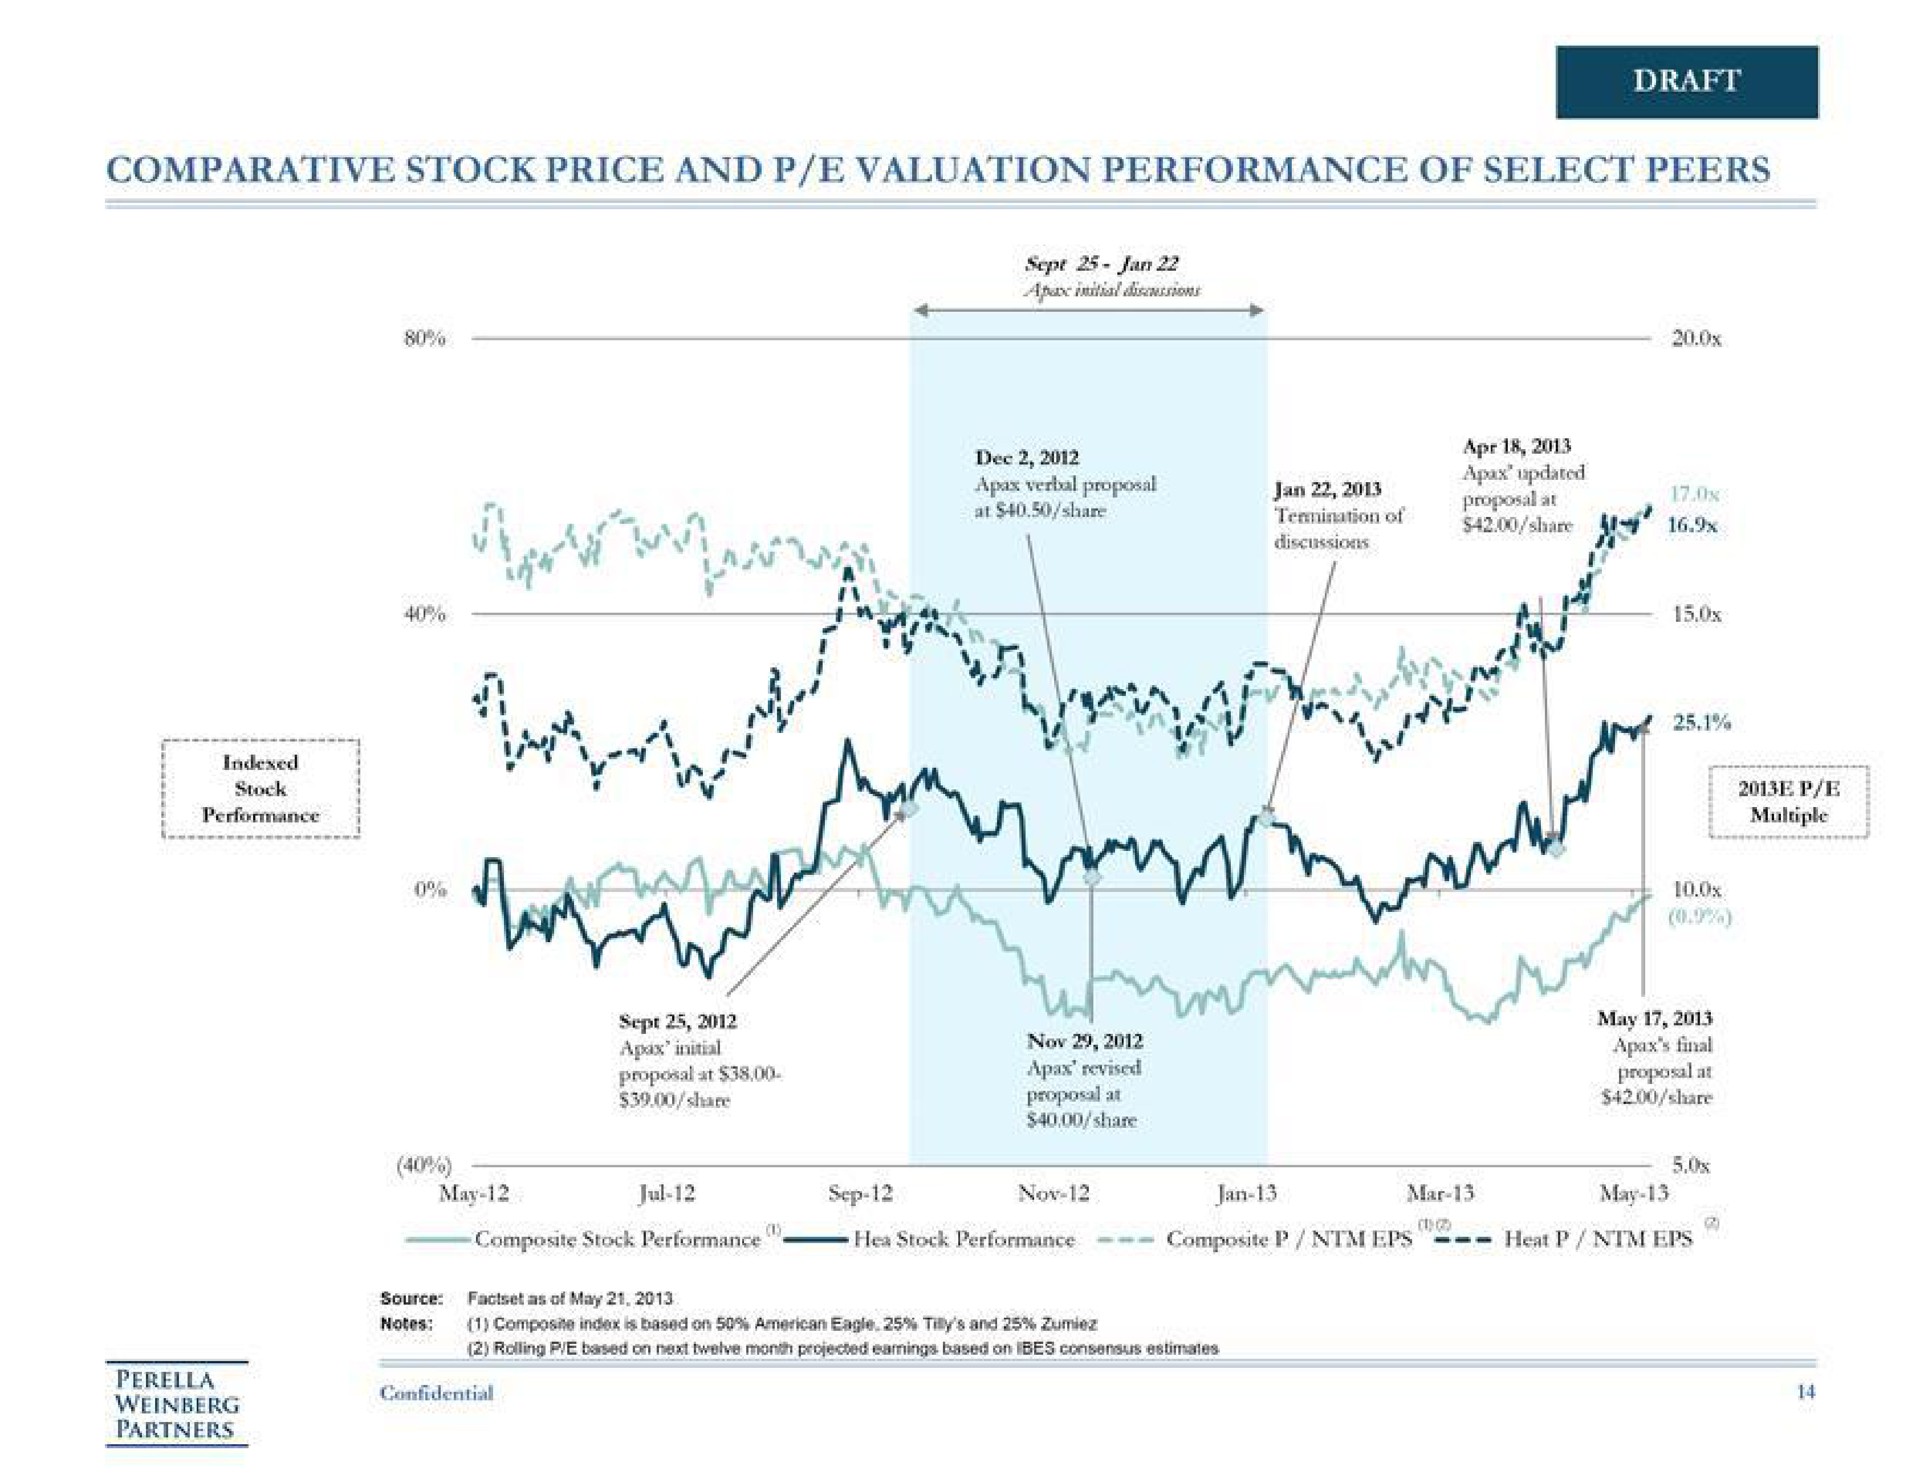 comparative stock price and valuation performance of select peers an as sos if at as share i a a bay | Perella Weinberg Partners